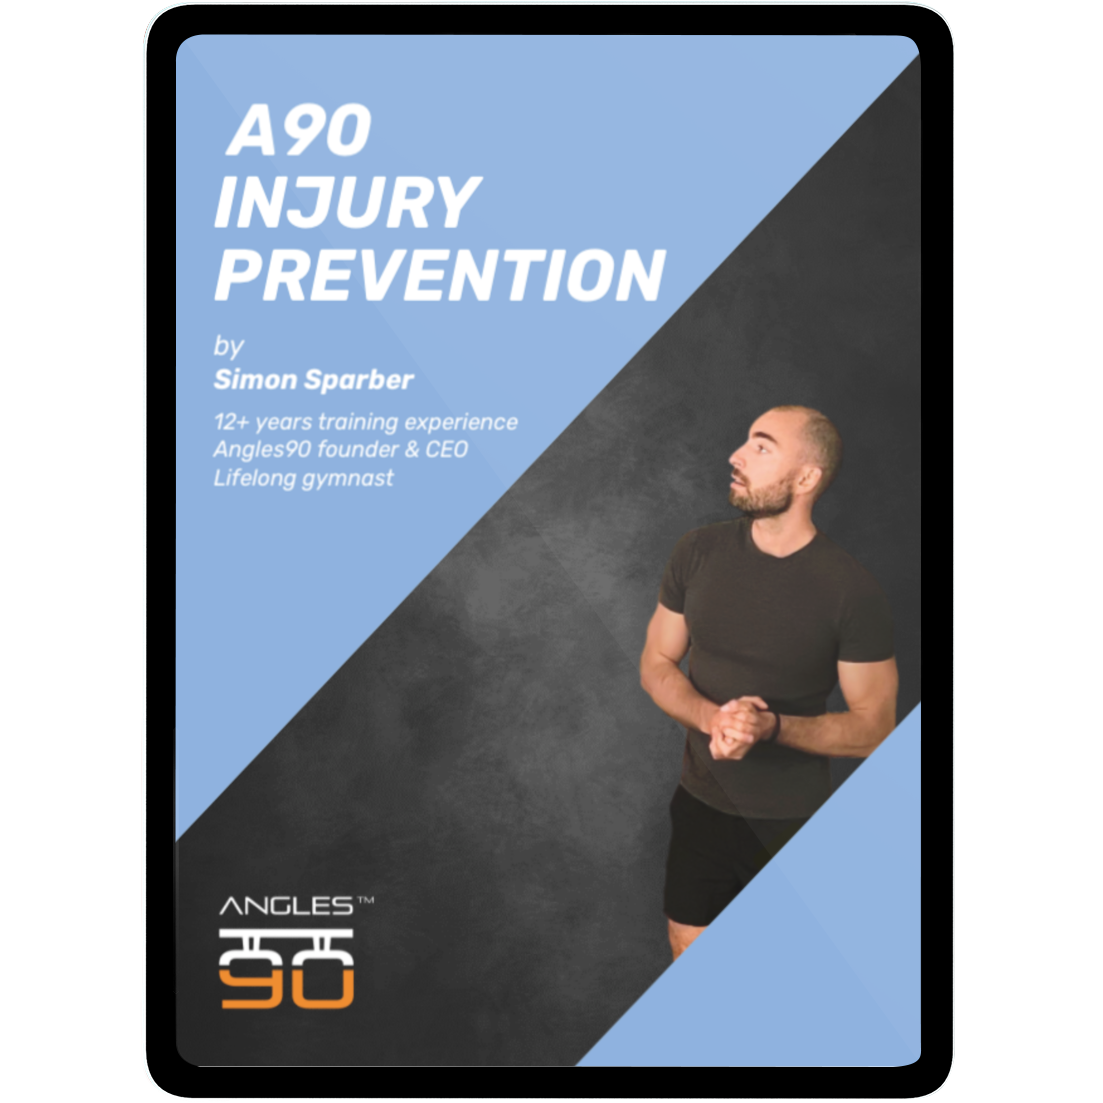 A fitness enthusiast stands thoughtfully on the cover of a book titled "A90 Injury Prevention (eBook & Video Material)" by Simon Barber, sharing his expertise gained from 12 years of strength training experience and a lifetime of gymn